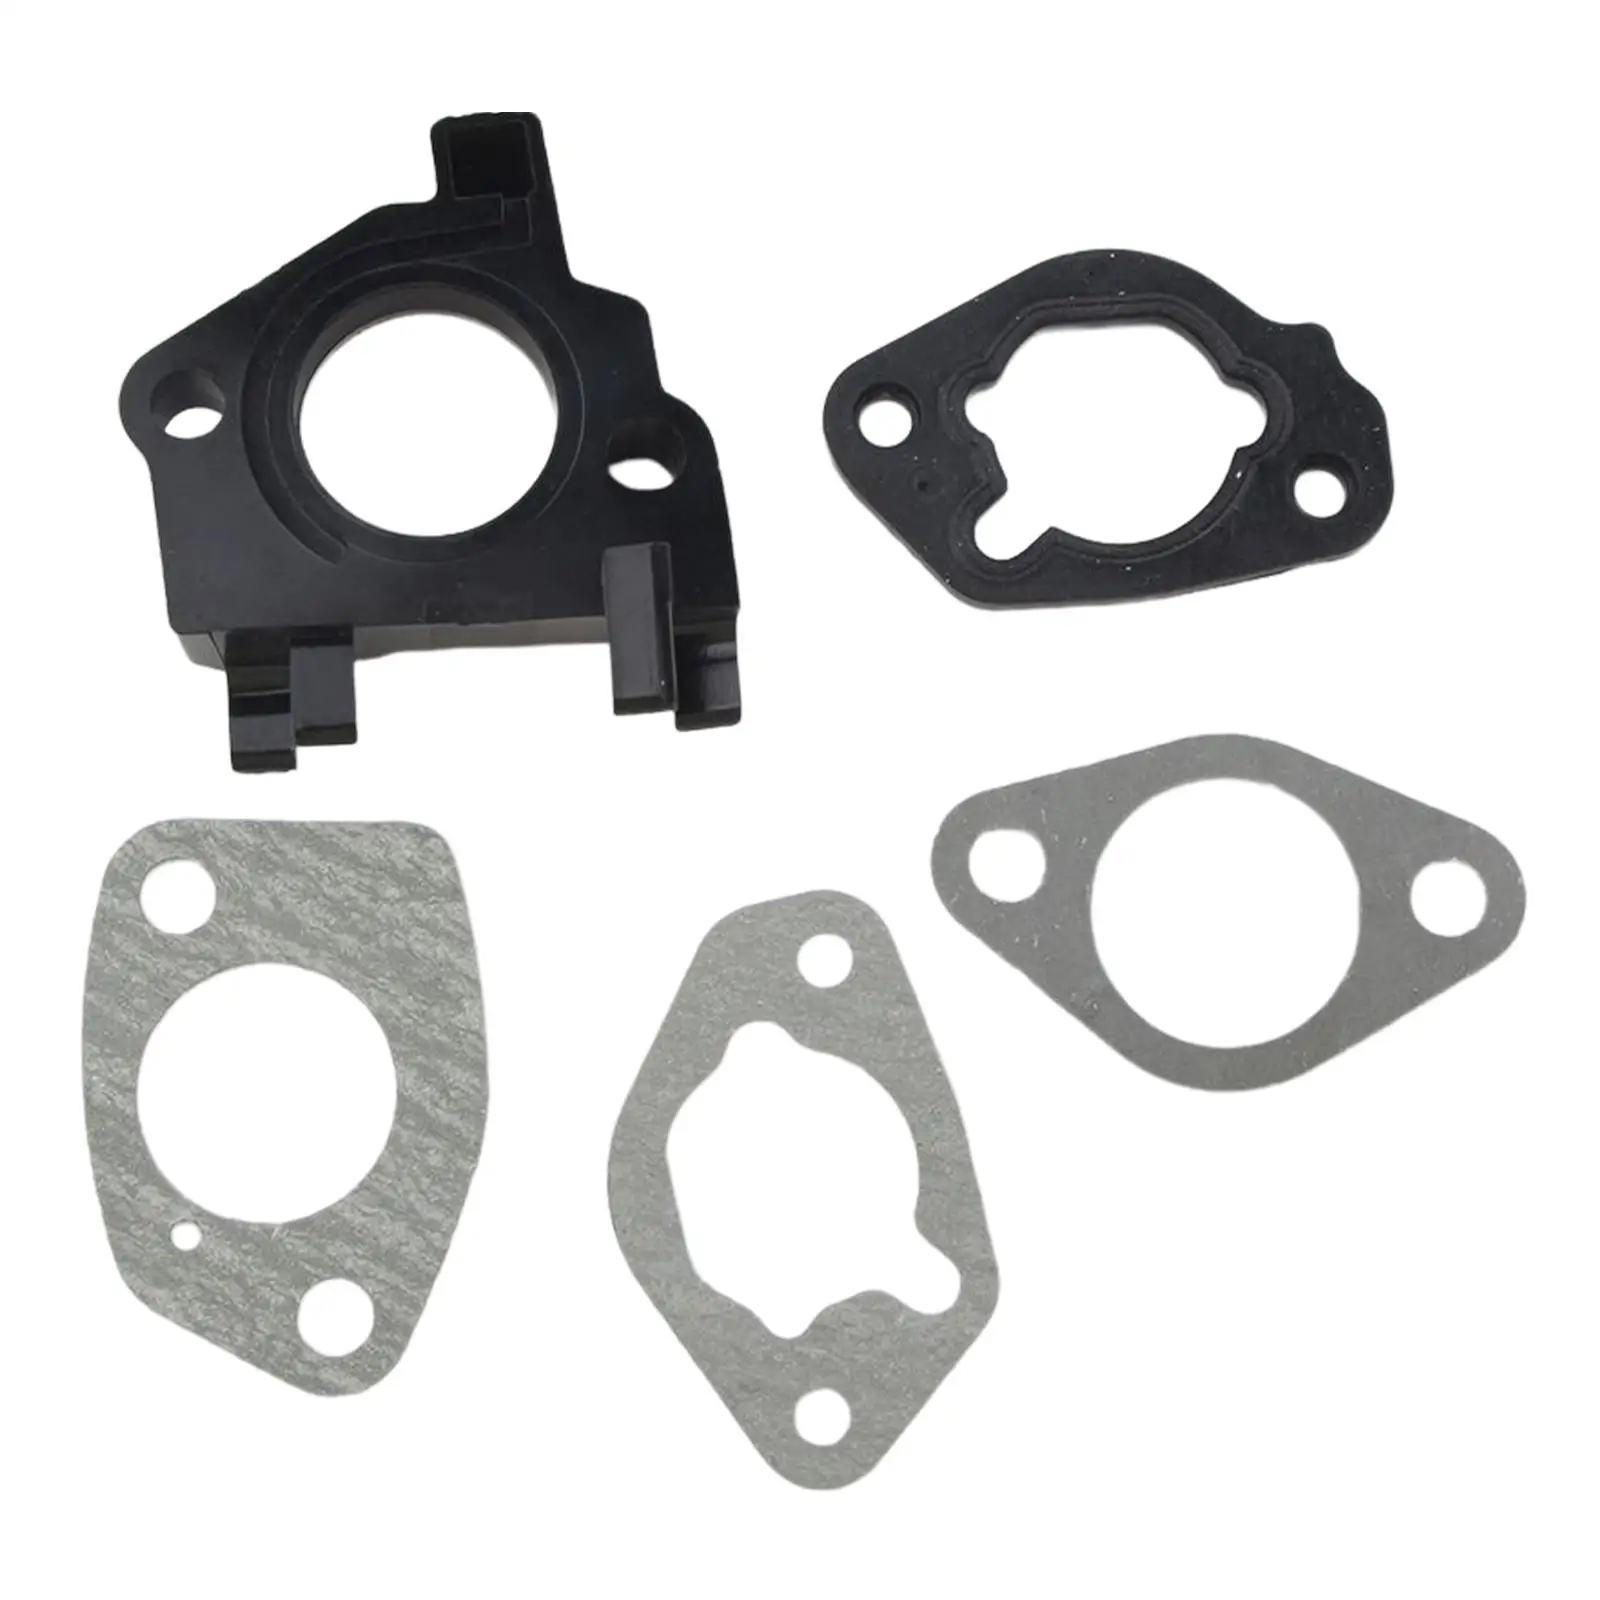 CARBURETOR Carburettor 5 GASKETS  3340 11HP Replaces - Perfect Fitment, directly replacement